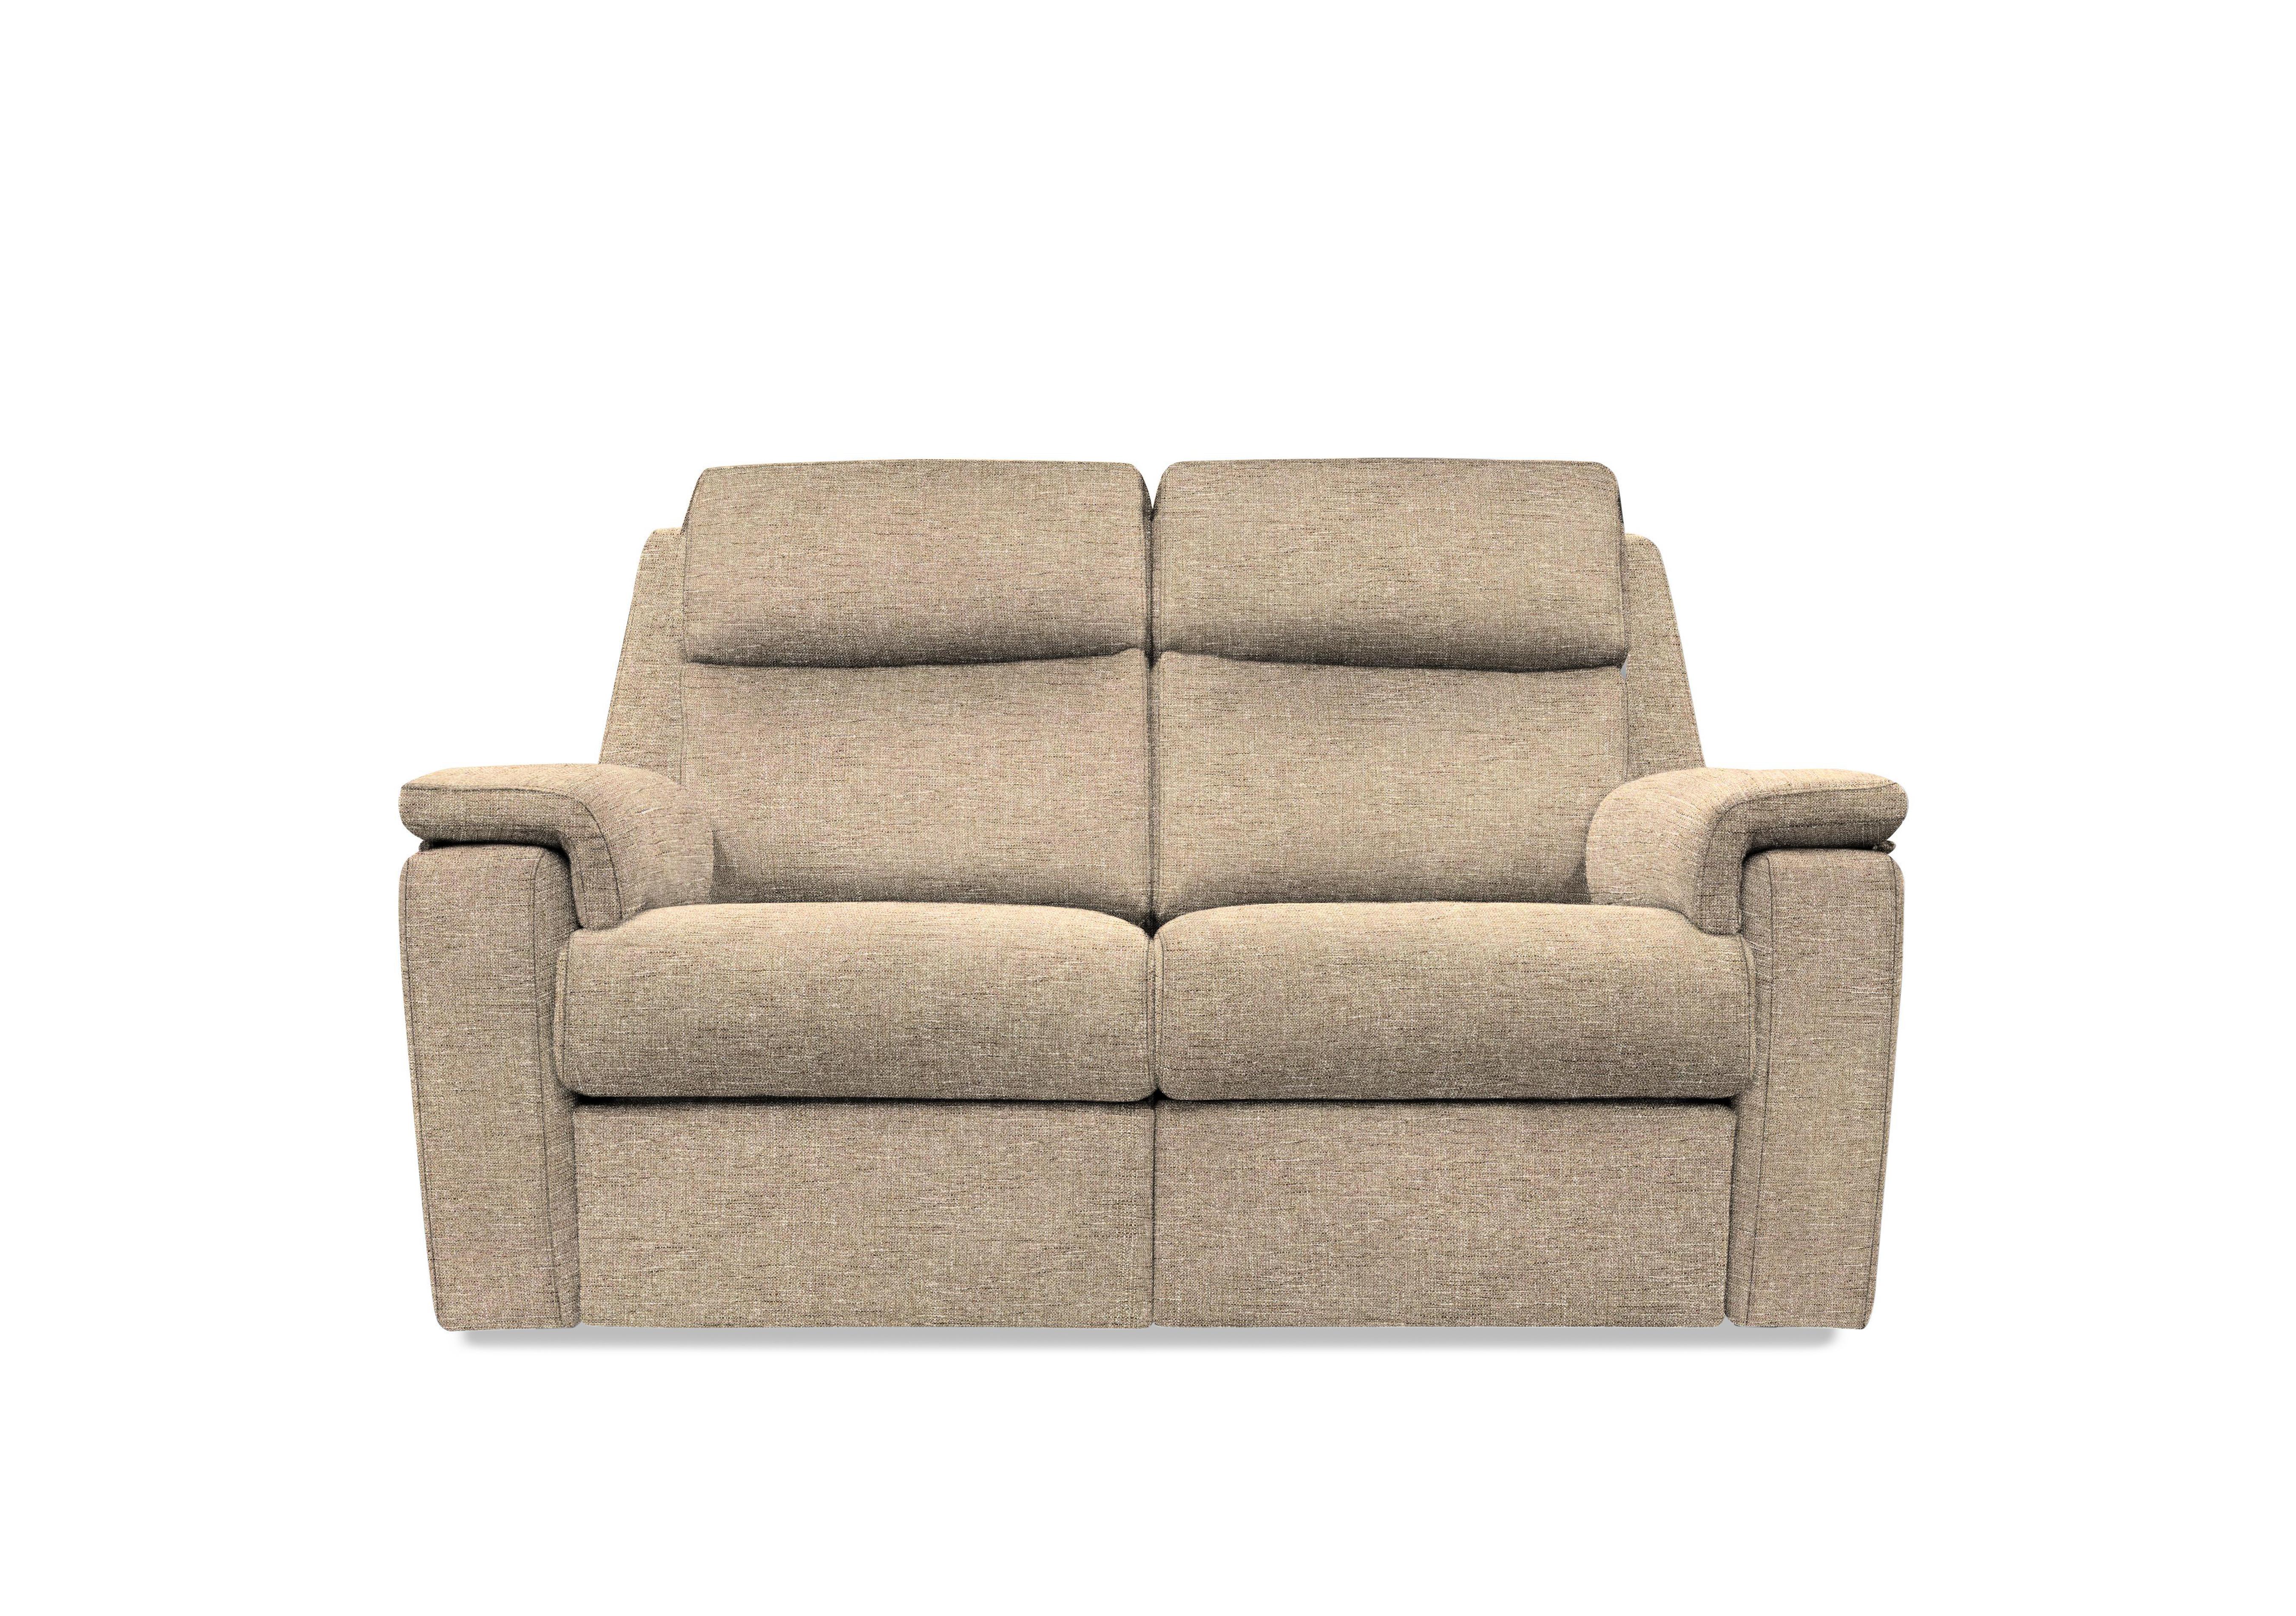 Thornbury 2 Seater Fabric Power Recliner Sofa with Power Headrests and Power Lumbar in A022 Dapple Sparrow on Furniture Village